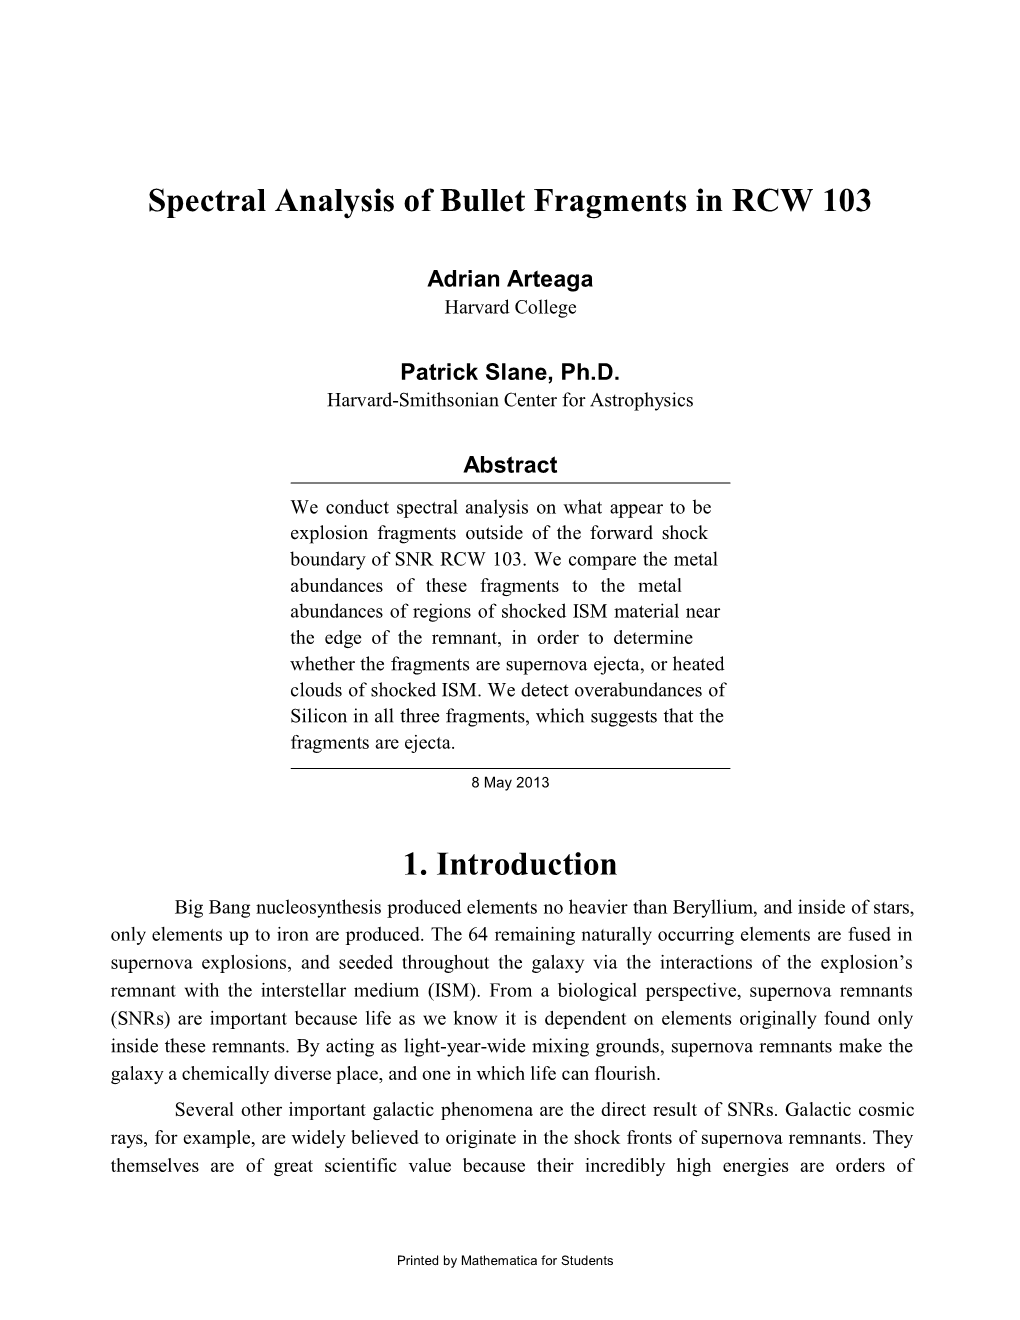 Spectral Analysis of Bullet Fragments in RCW 103 1